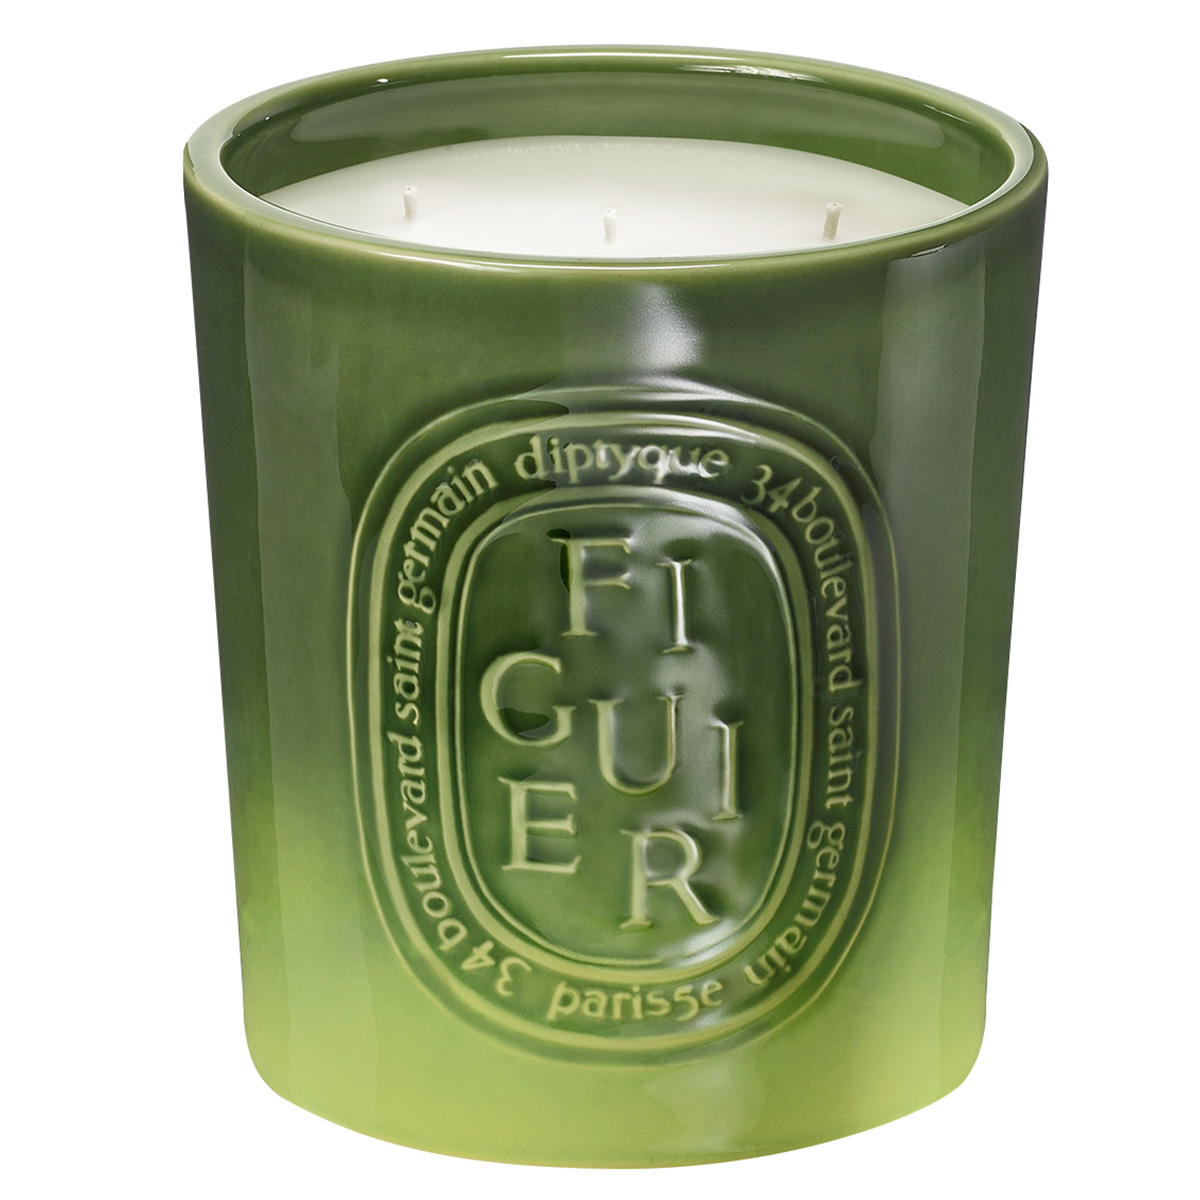 diptyque Figuier Giant scented candle 1500 g - 1